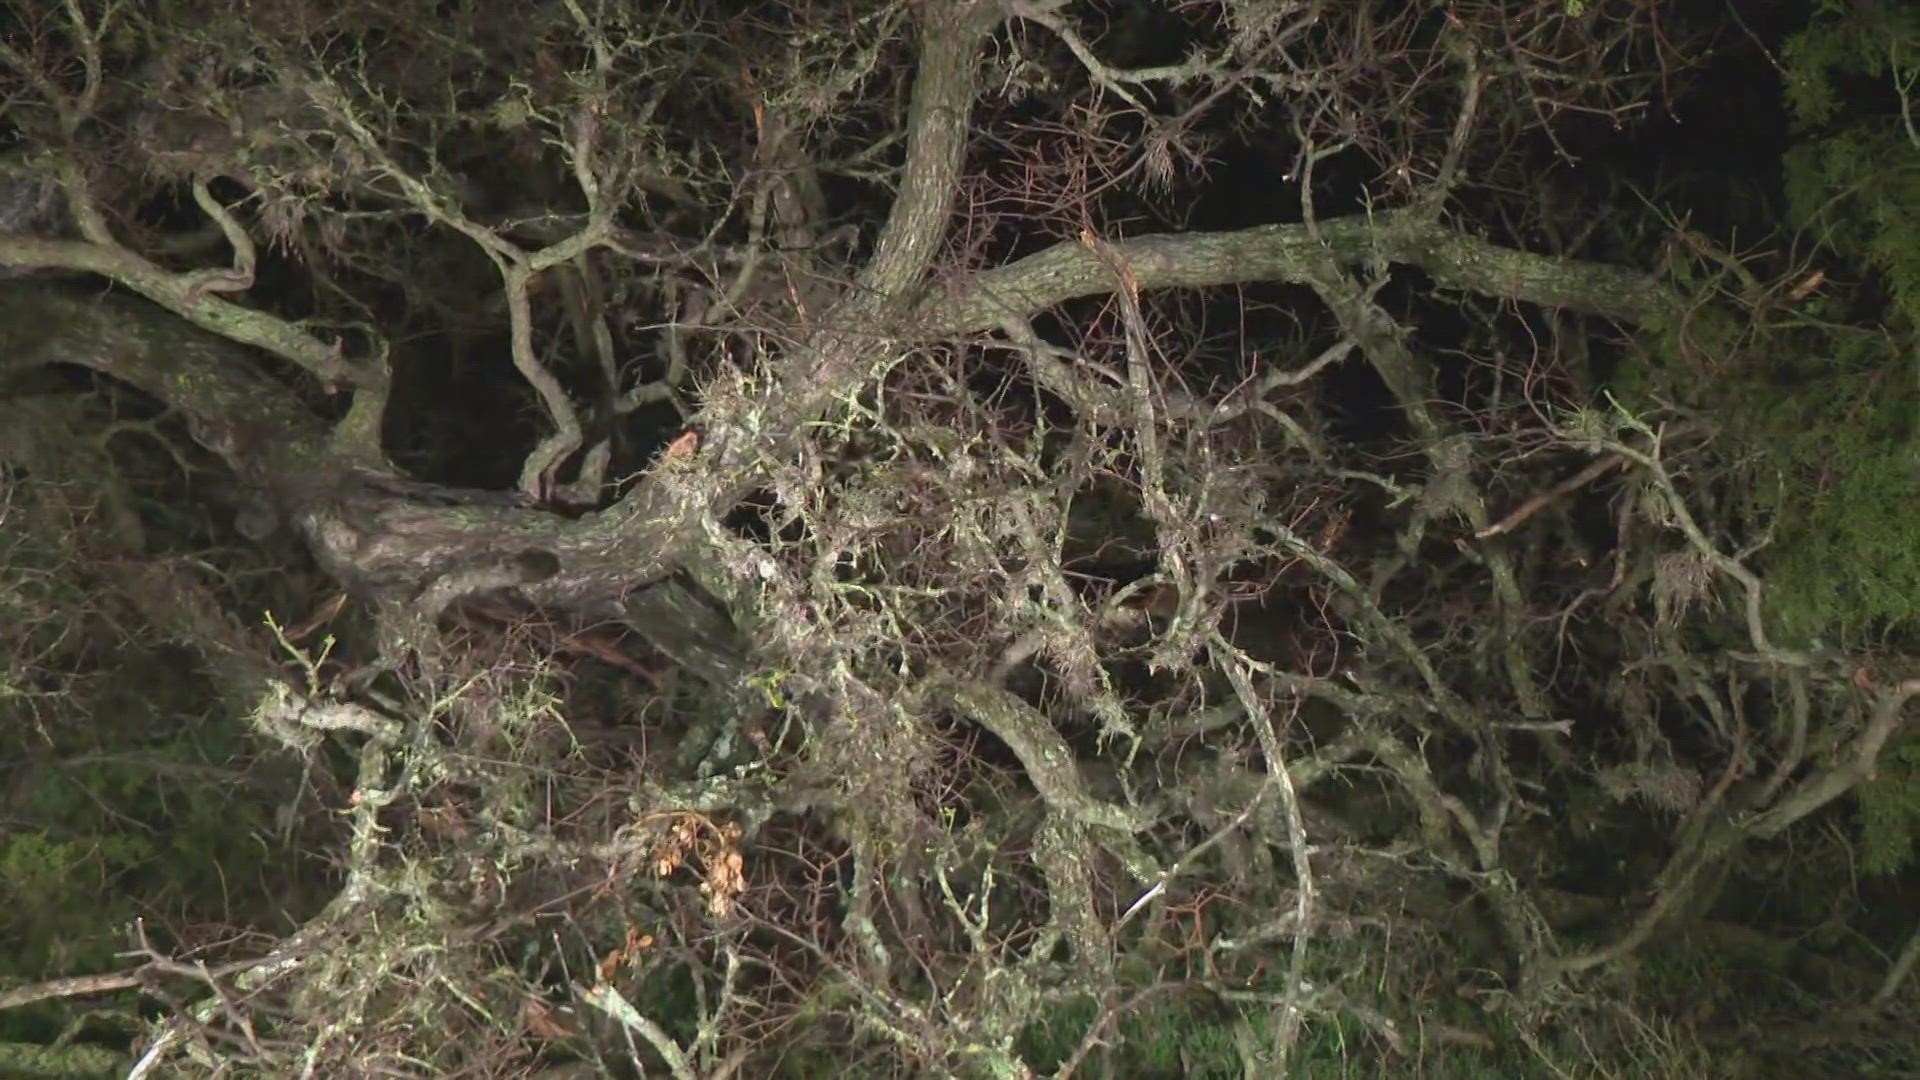 Aside from winter storm cleanup, people are now having to worry about a deadly fungus that could be attacking trees. KVUE's Pamela Comme has more on oak wilt season.